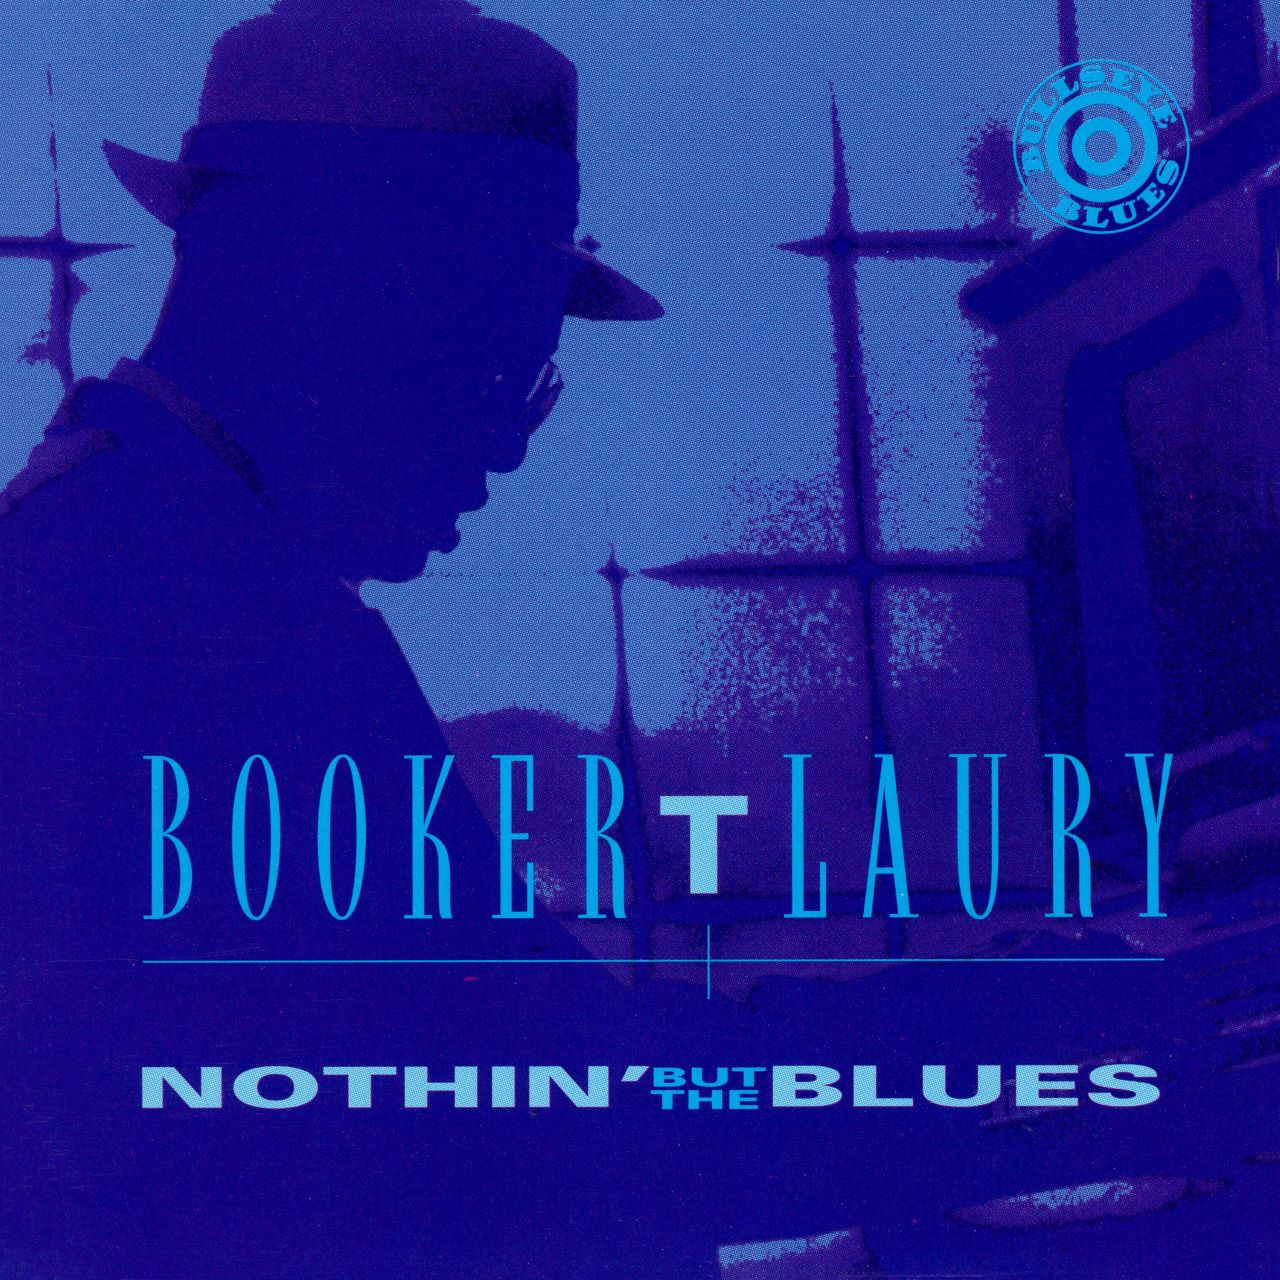 Booker T. Laury – Nothin’ But The Blues cover album